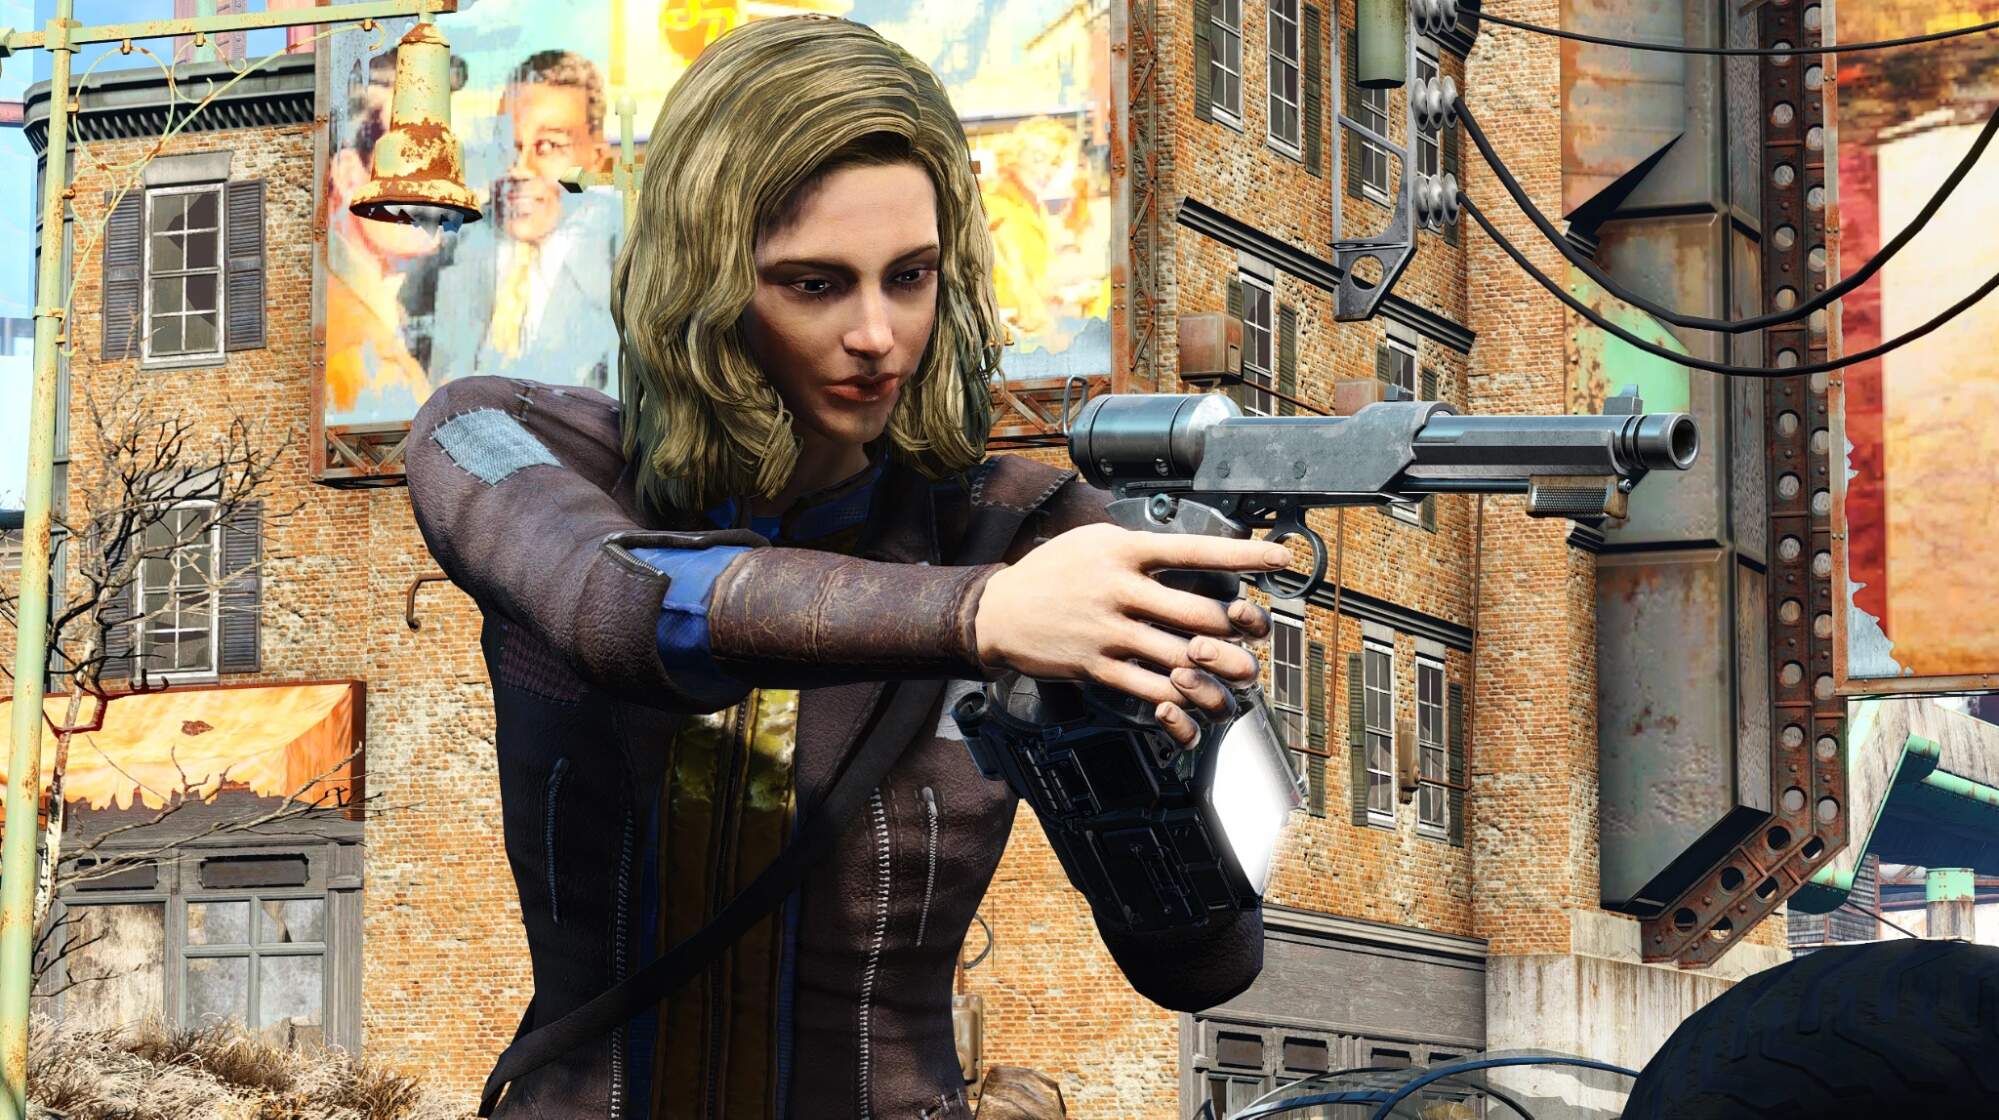 Best Fallout Mods for Fallout 4 - Fallout Tranquiliser Blaster Mod for Lucy